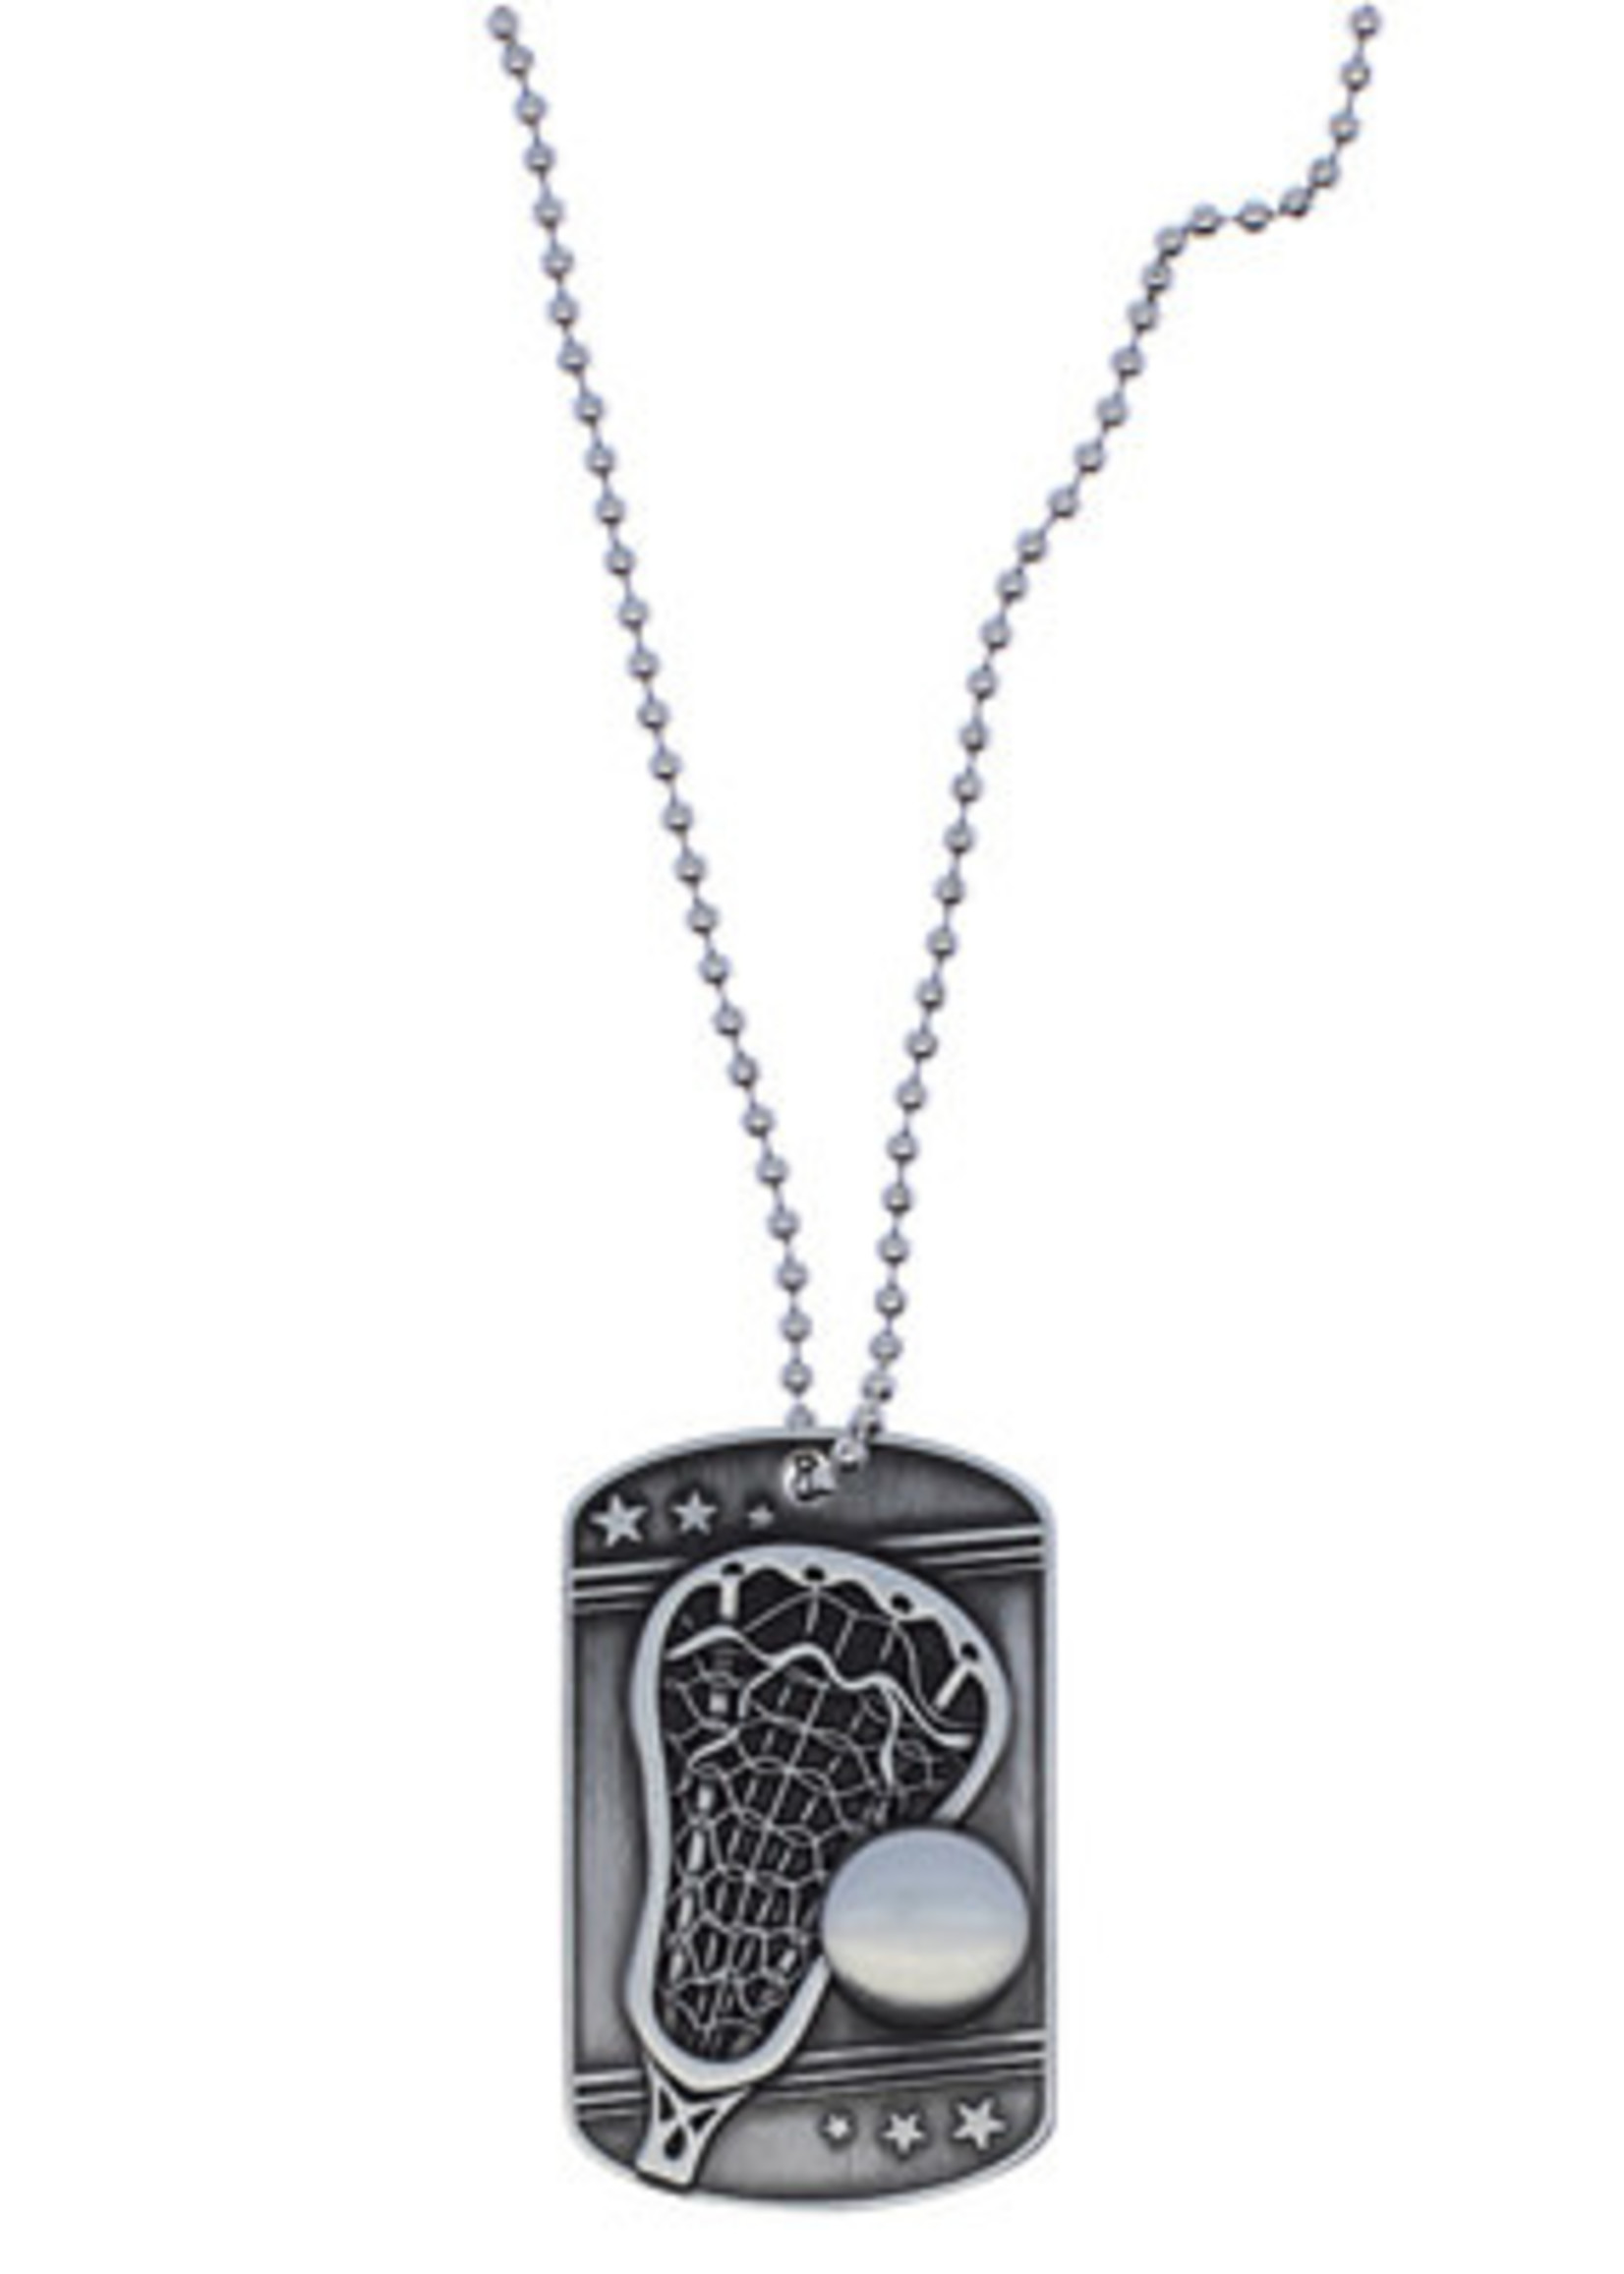 Dog Tag with Ball Chain - Lacrosse